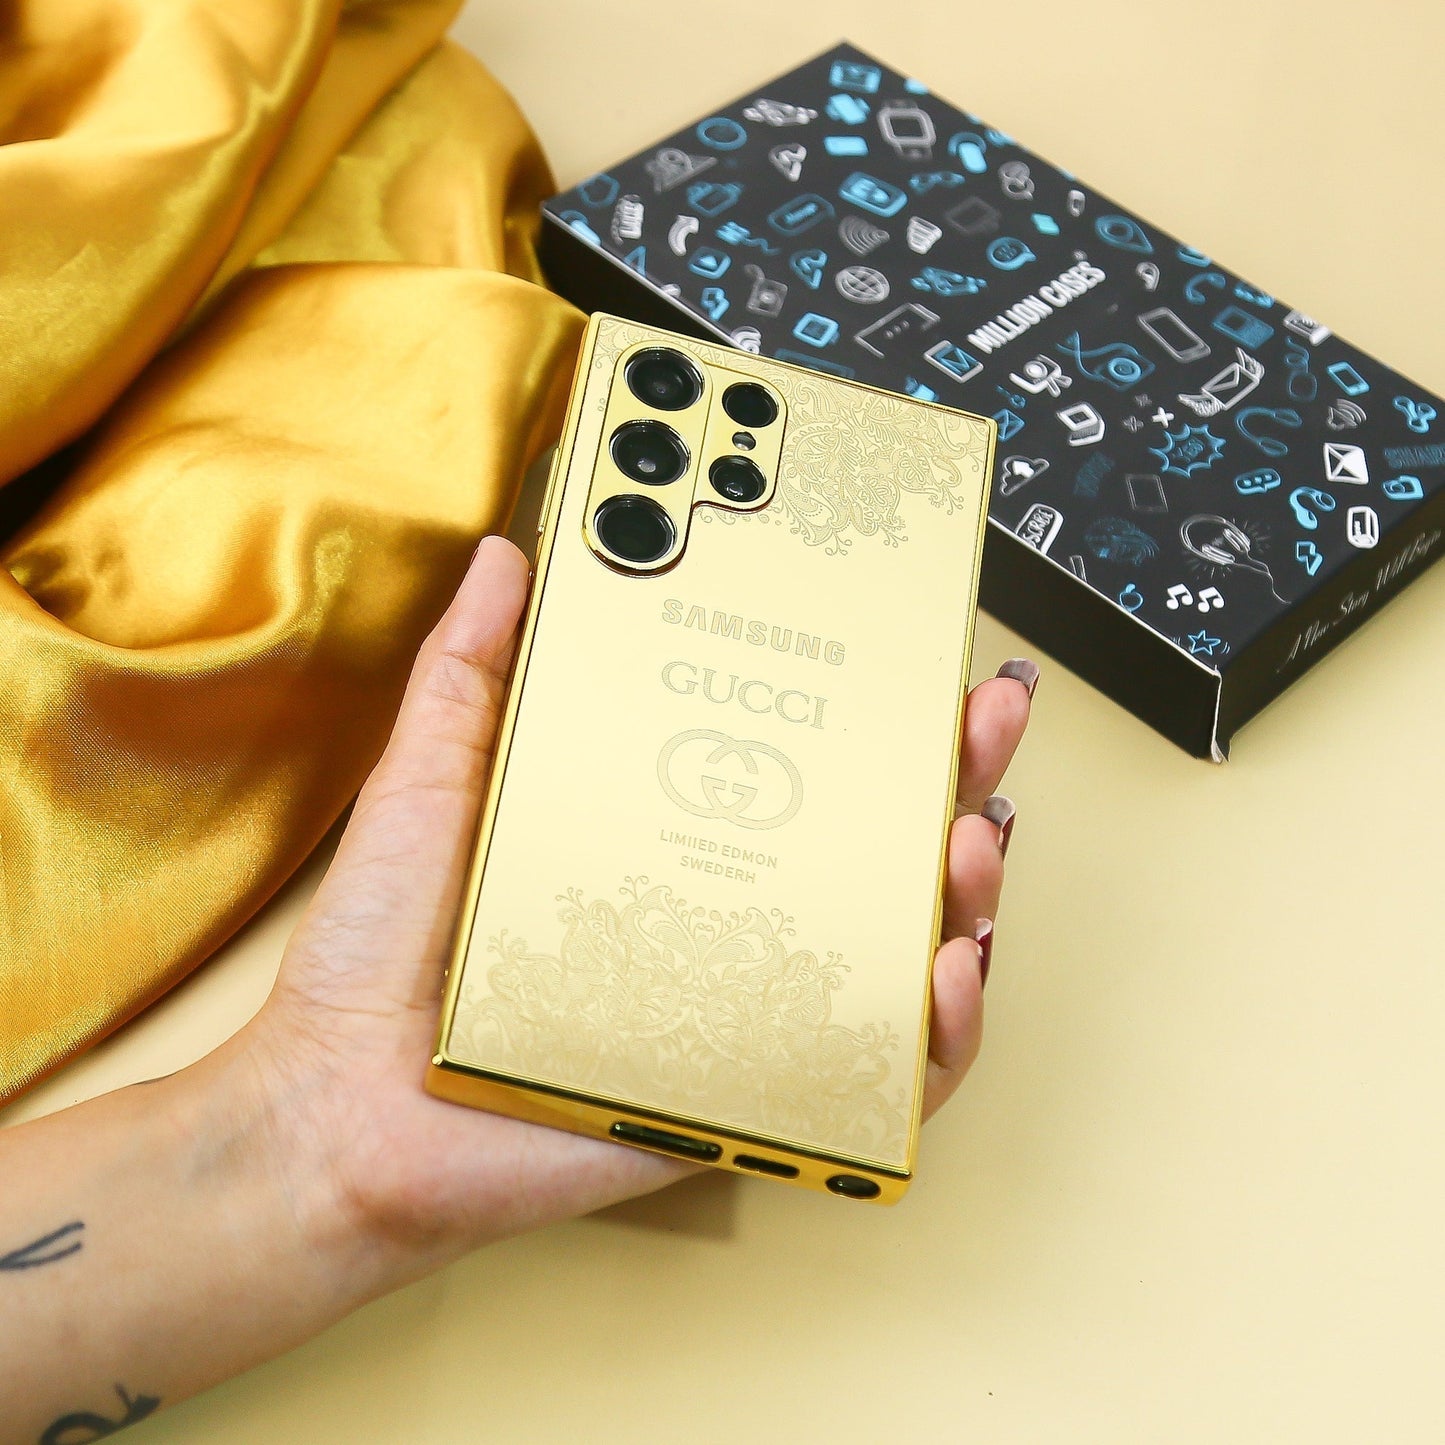 Limited Edition Gold Crafted Gucci Case - Samsung